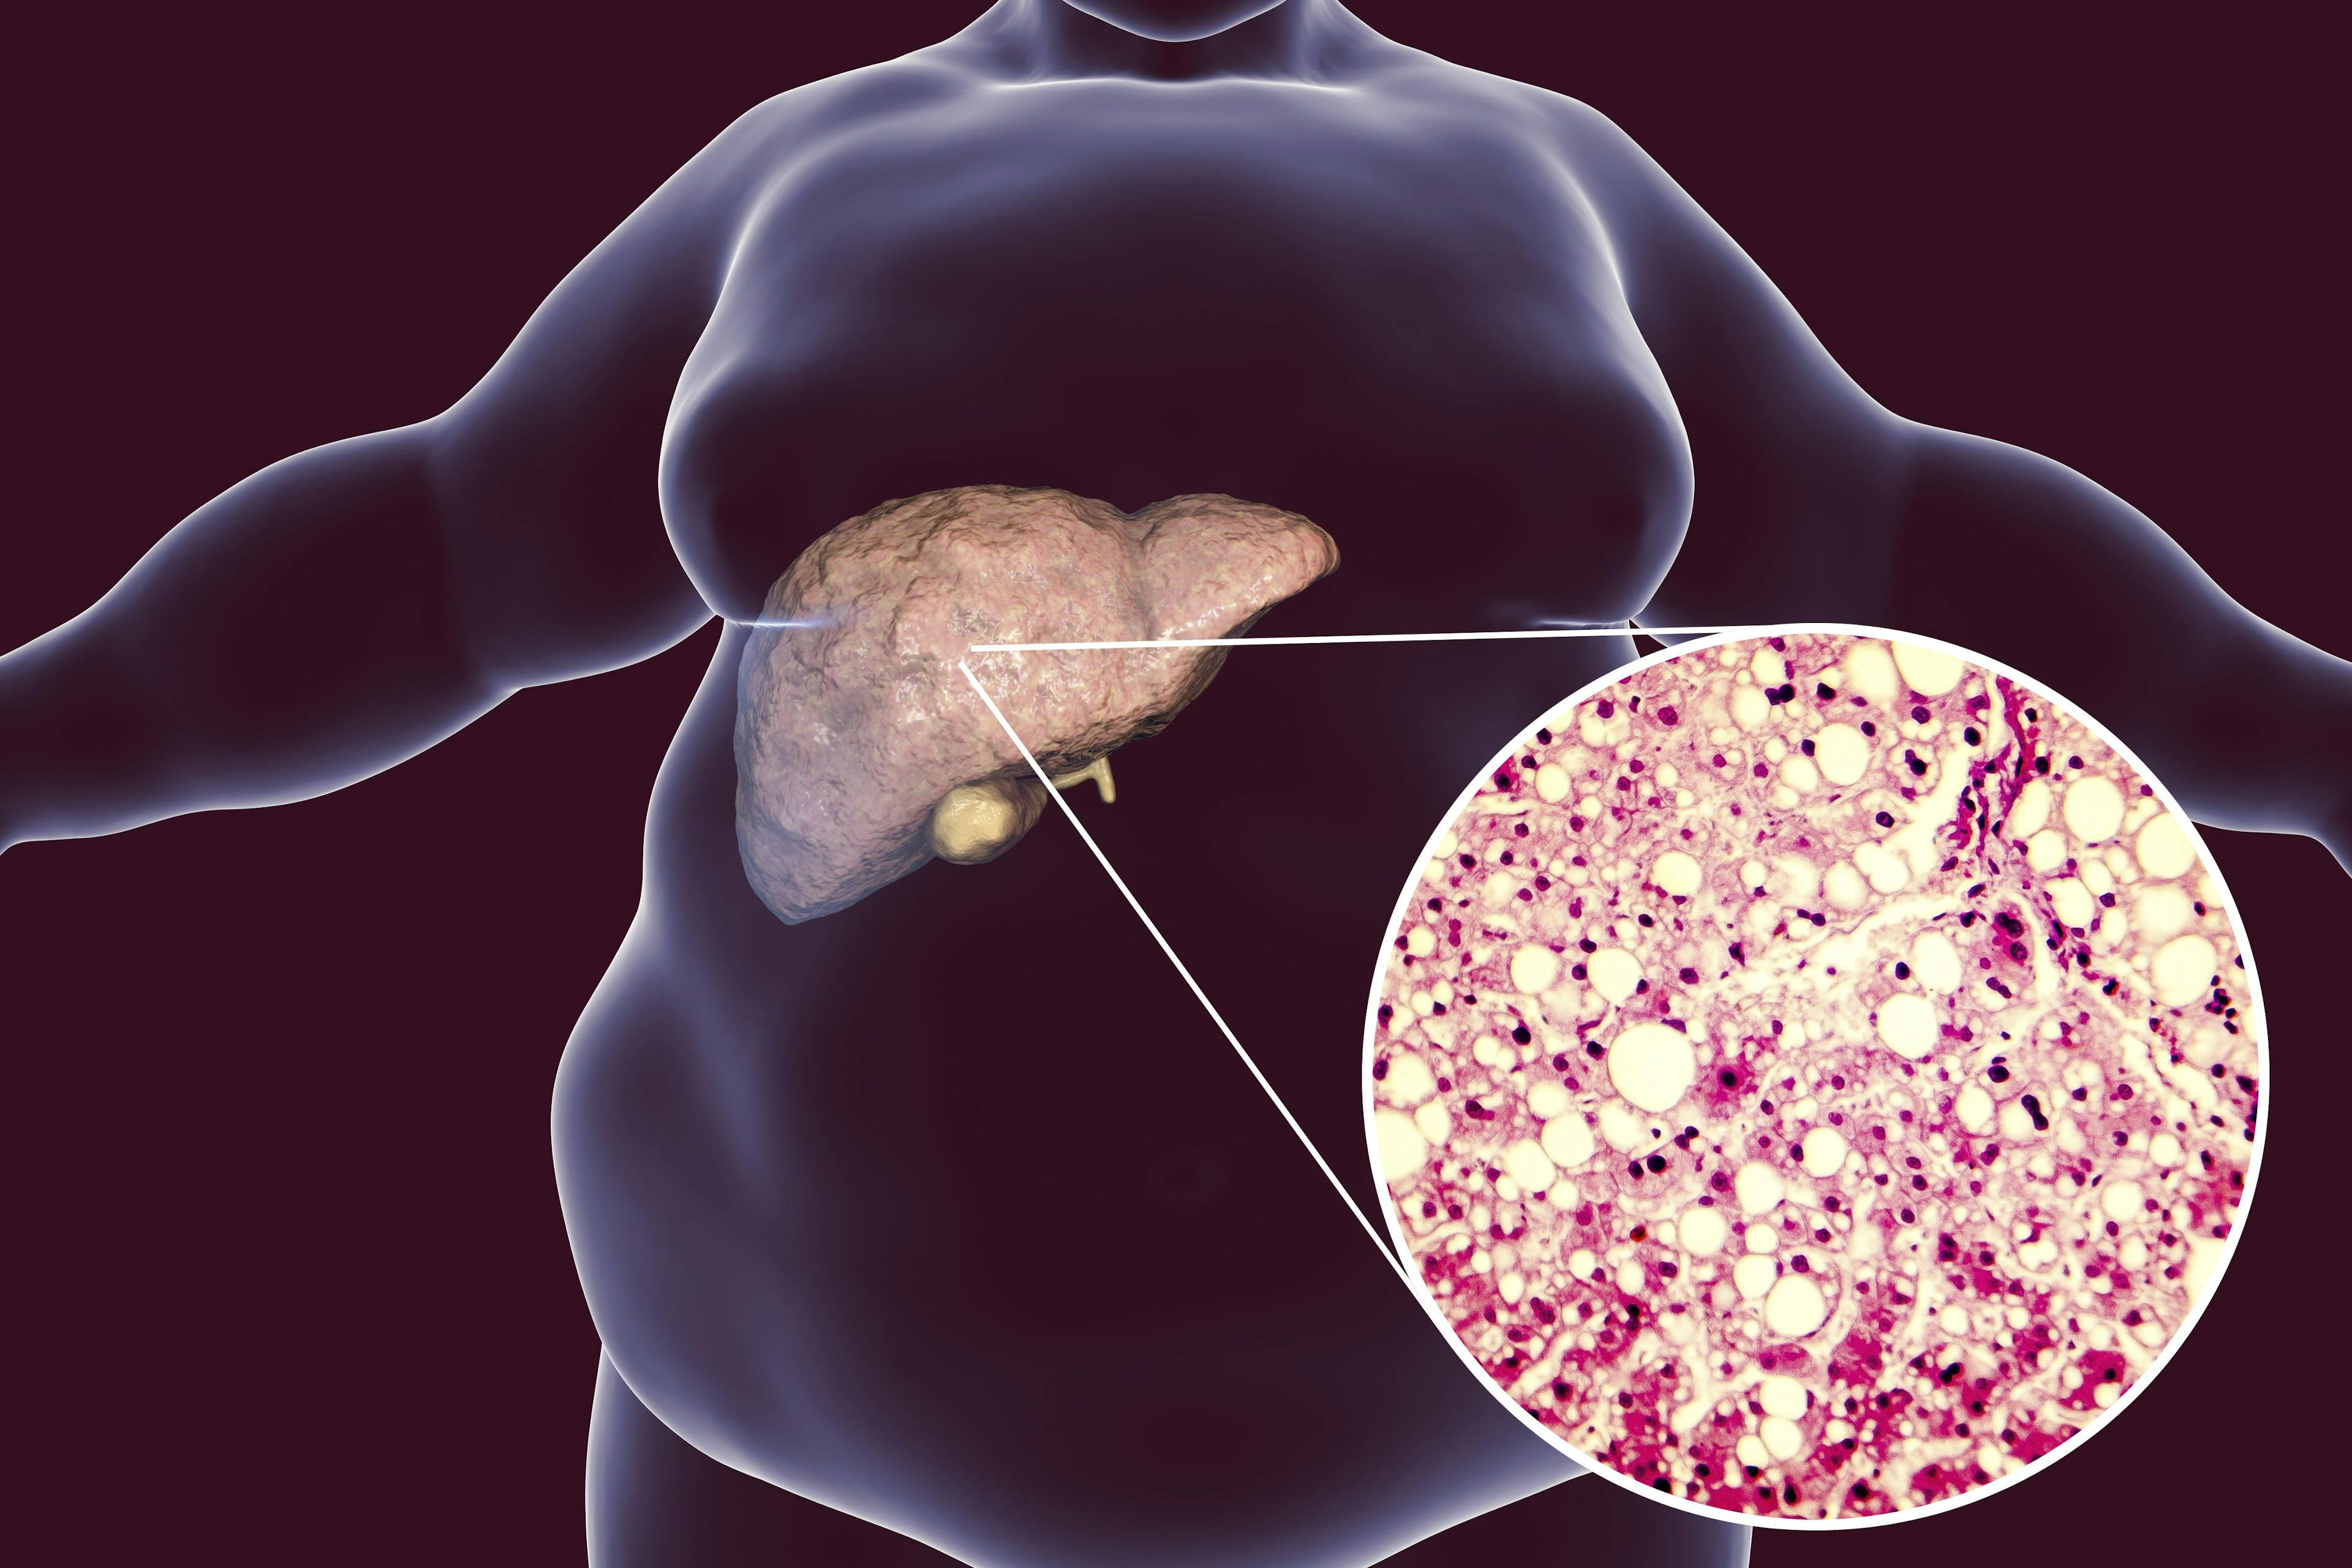 Advances in Nonalcoholic Fatty Liver Disease Unveiled at International Liver Congress